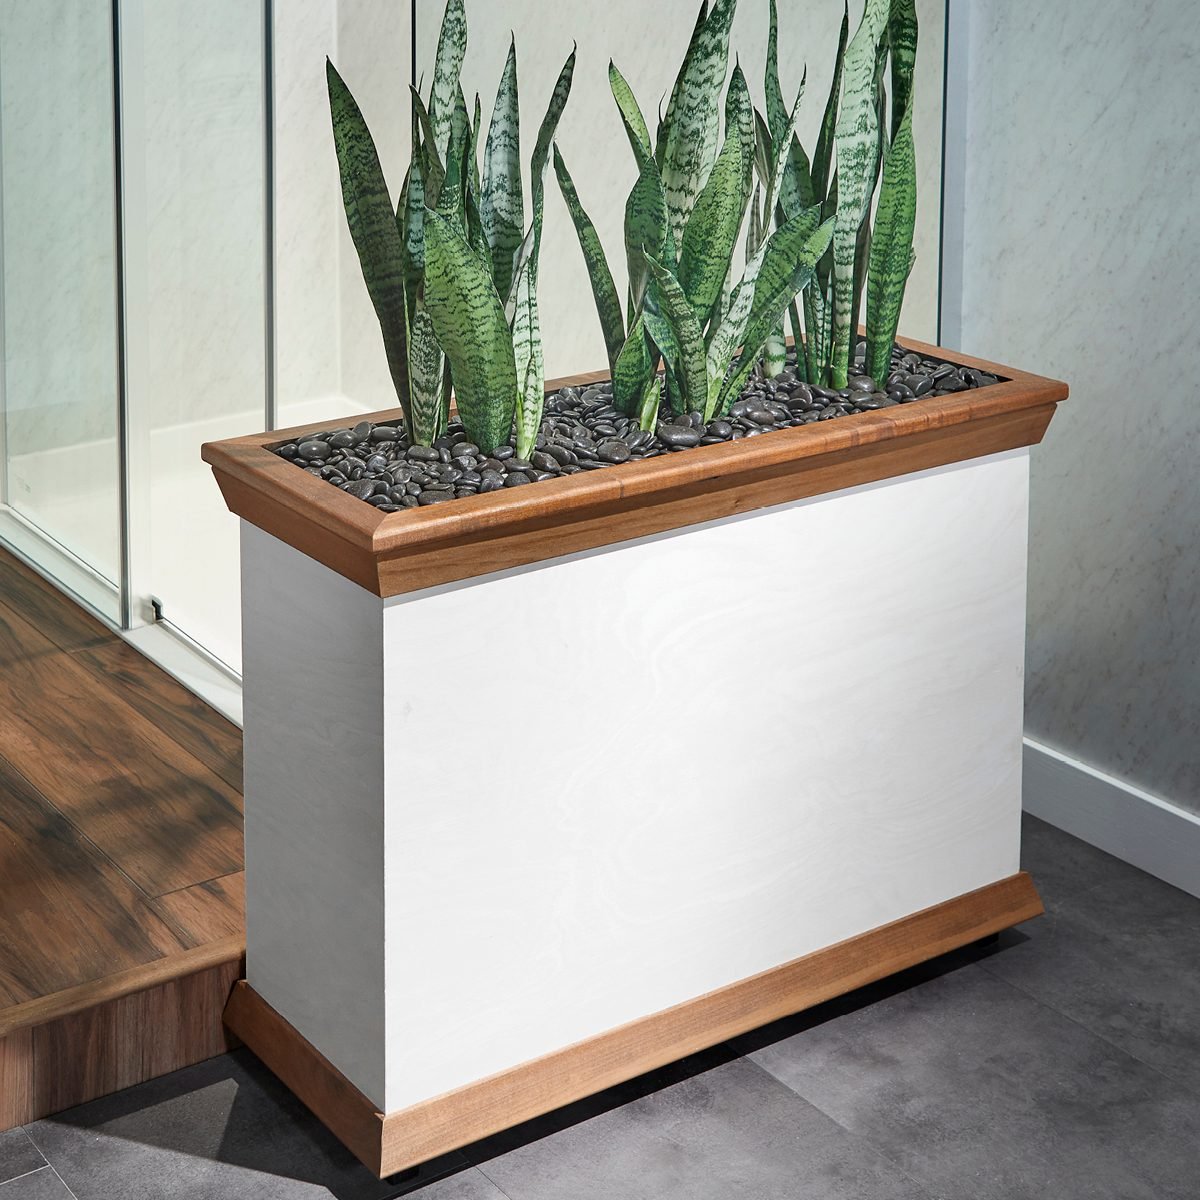 How To Make an Indoor Planter Box